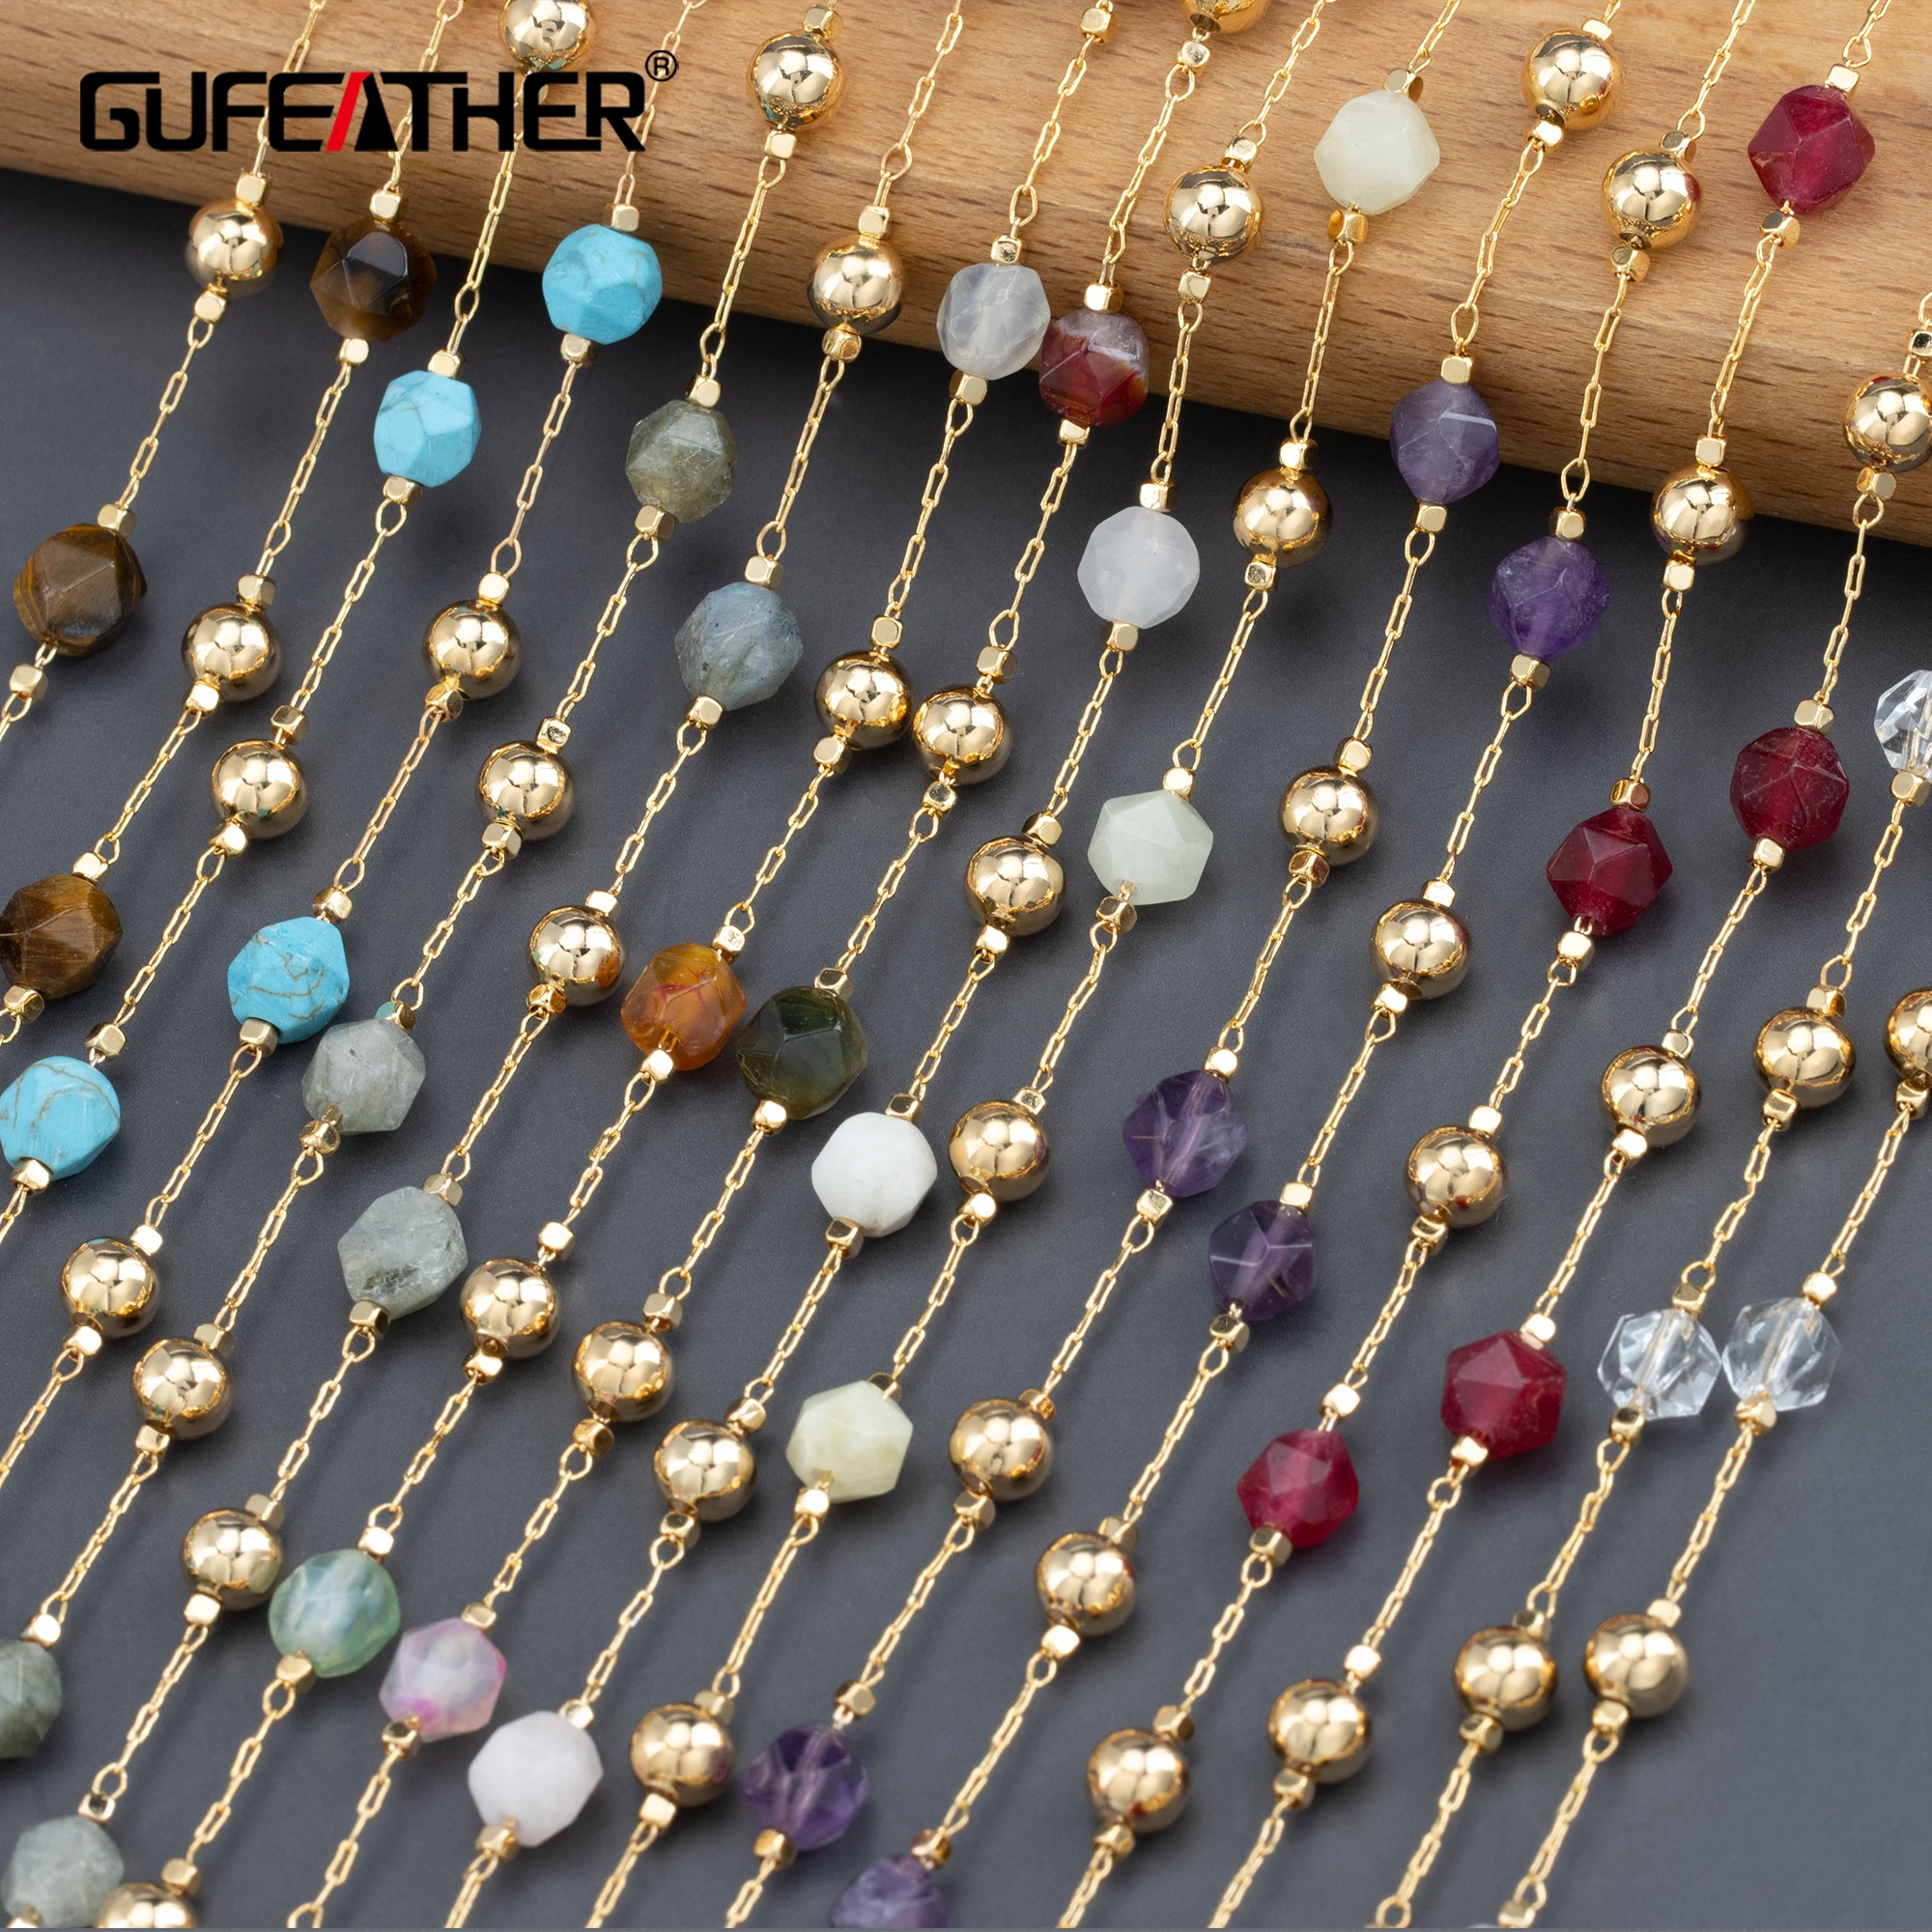 

GUFEATHER C282,diy chain,pass REACH,nickel free,18k gold plated,copper,natural stone,jewelry making,diy bracelet necklace,1m/lot